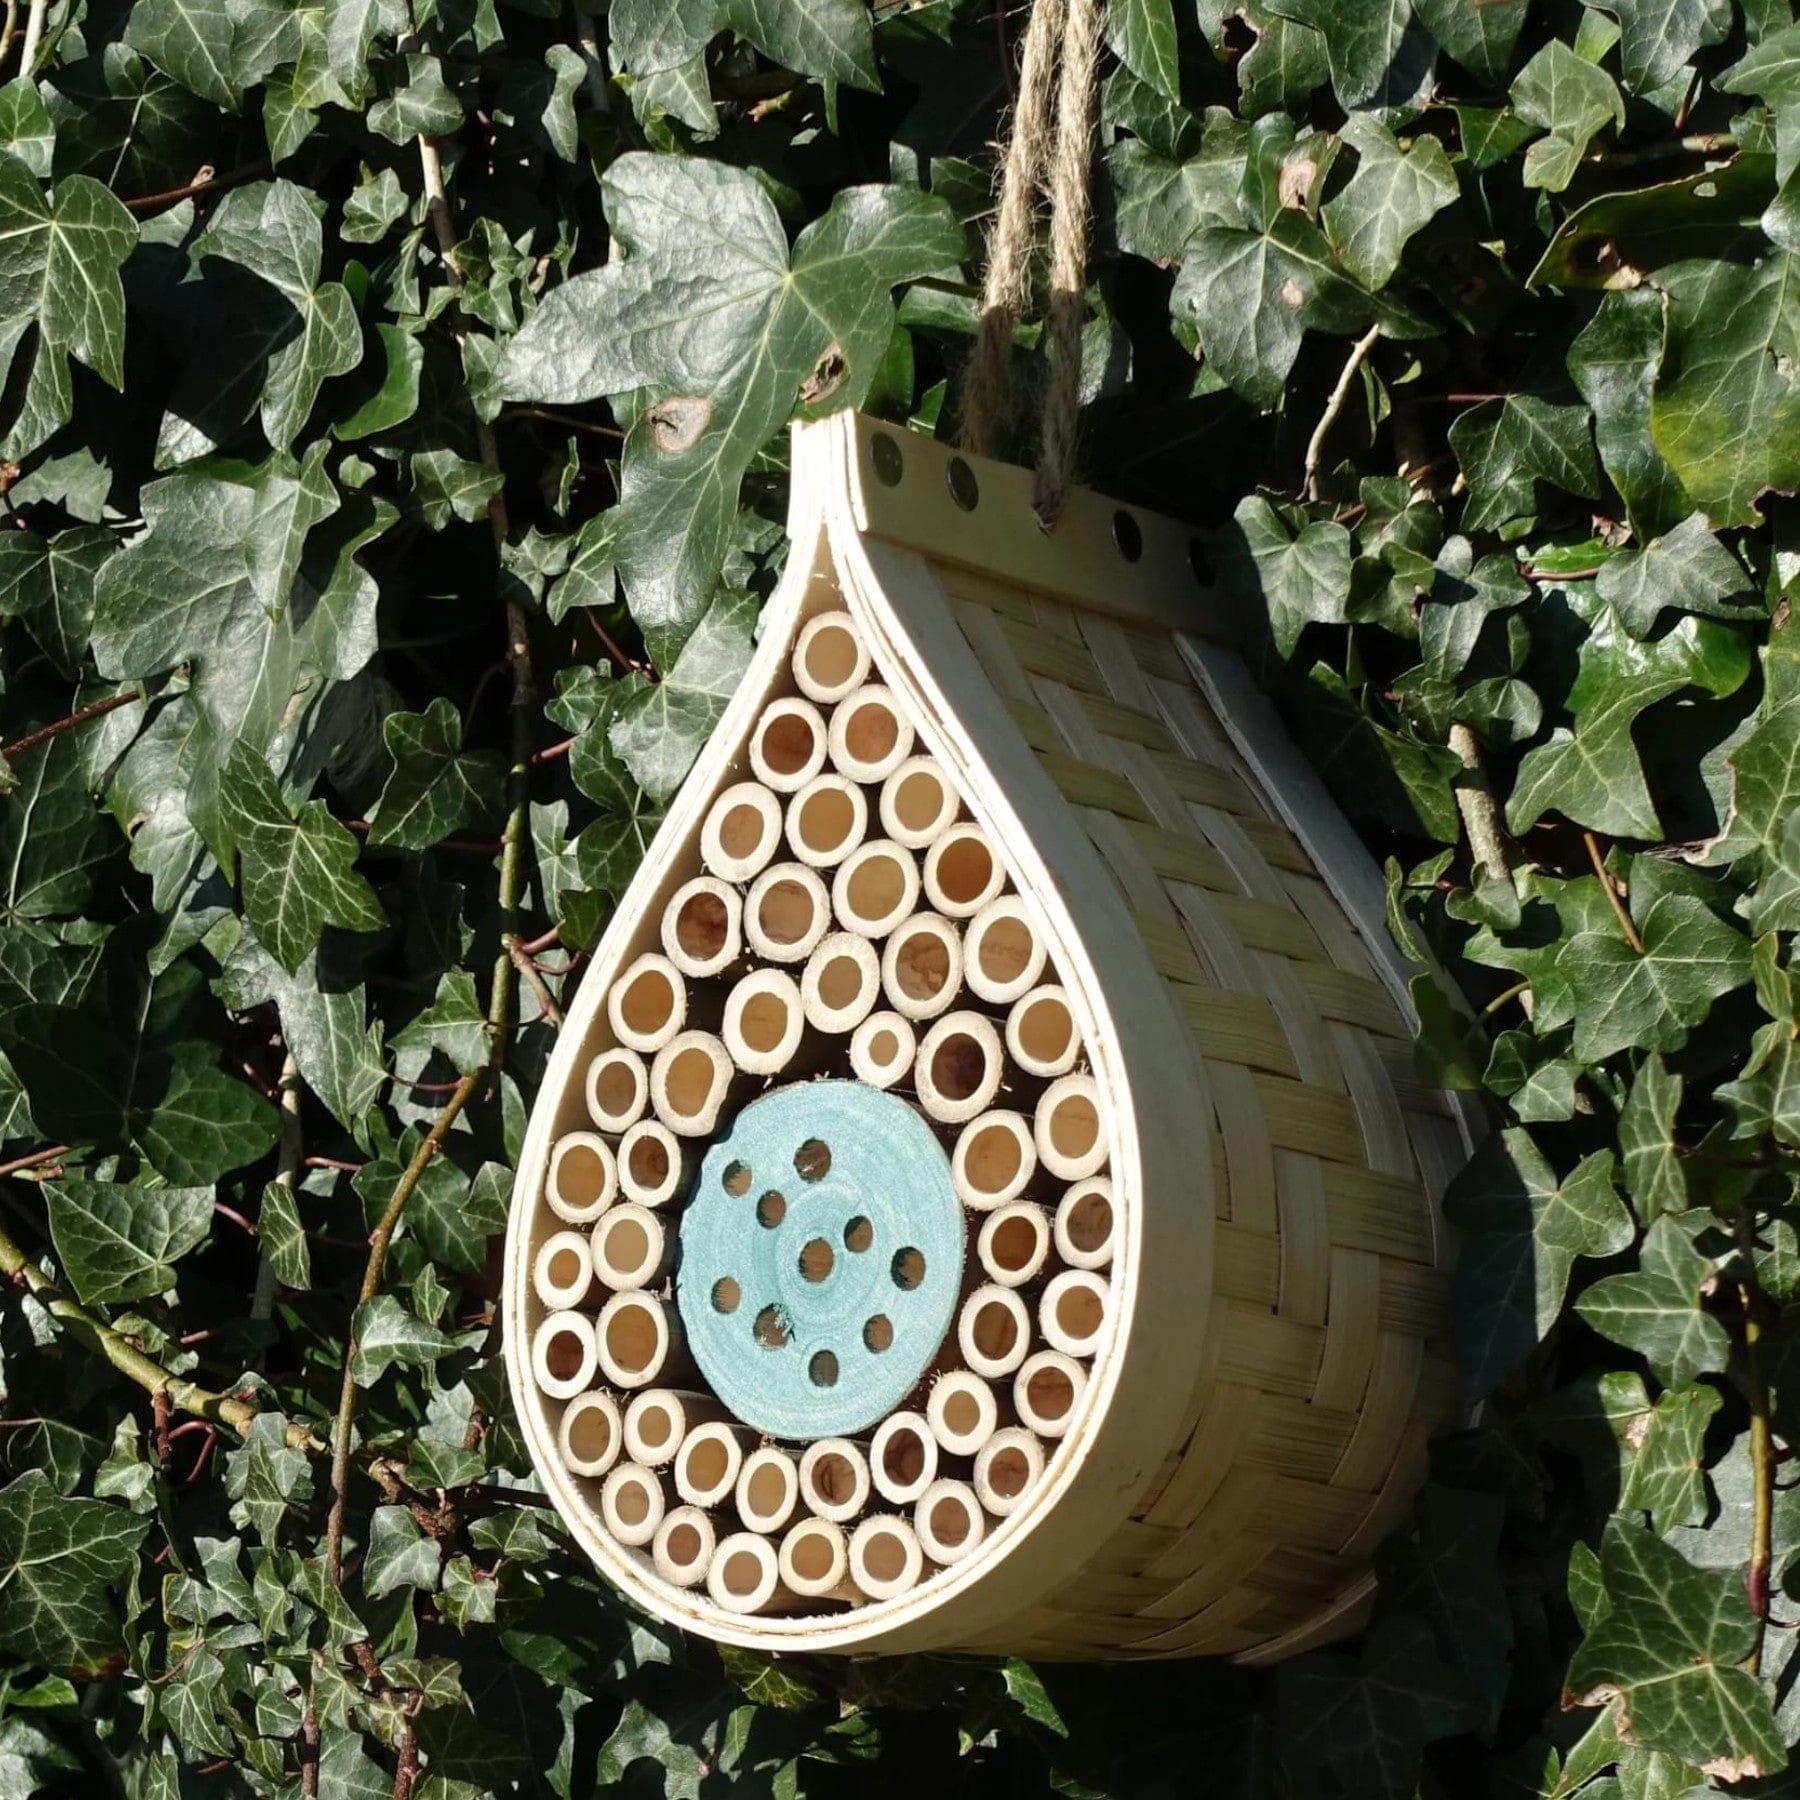 Wooden bee hotel hanging from a rope against an ivy-covered wall, providing nesting habitat for solitary bees in a garden environment